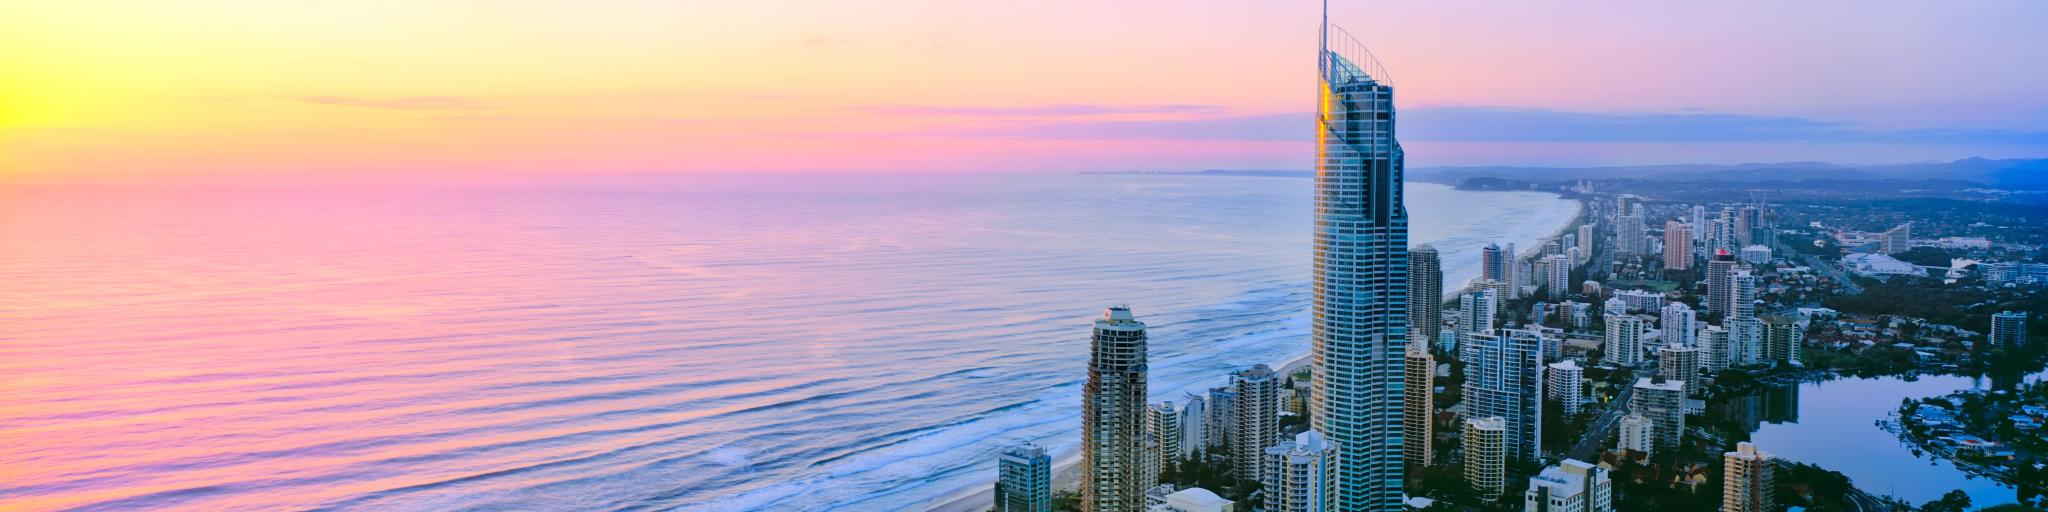 Sunrise casts a pink light over a long stretch of coast with highrise buildings